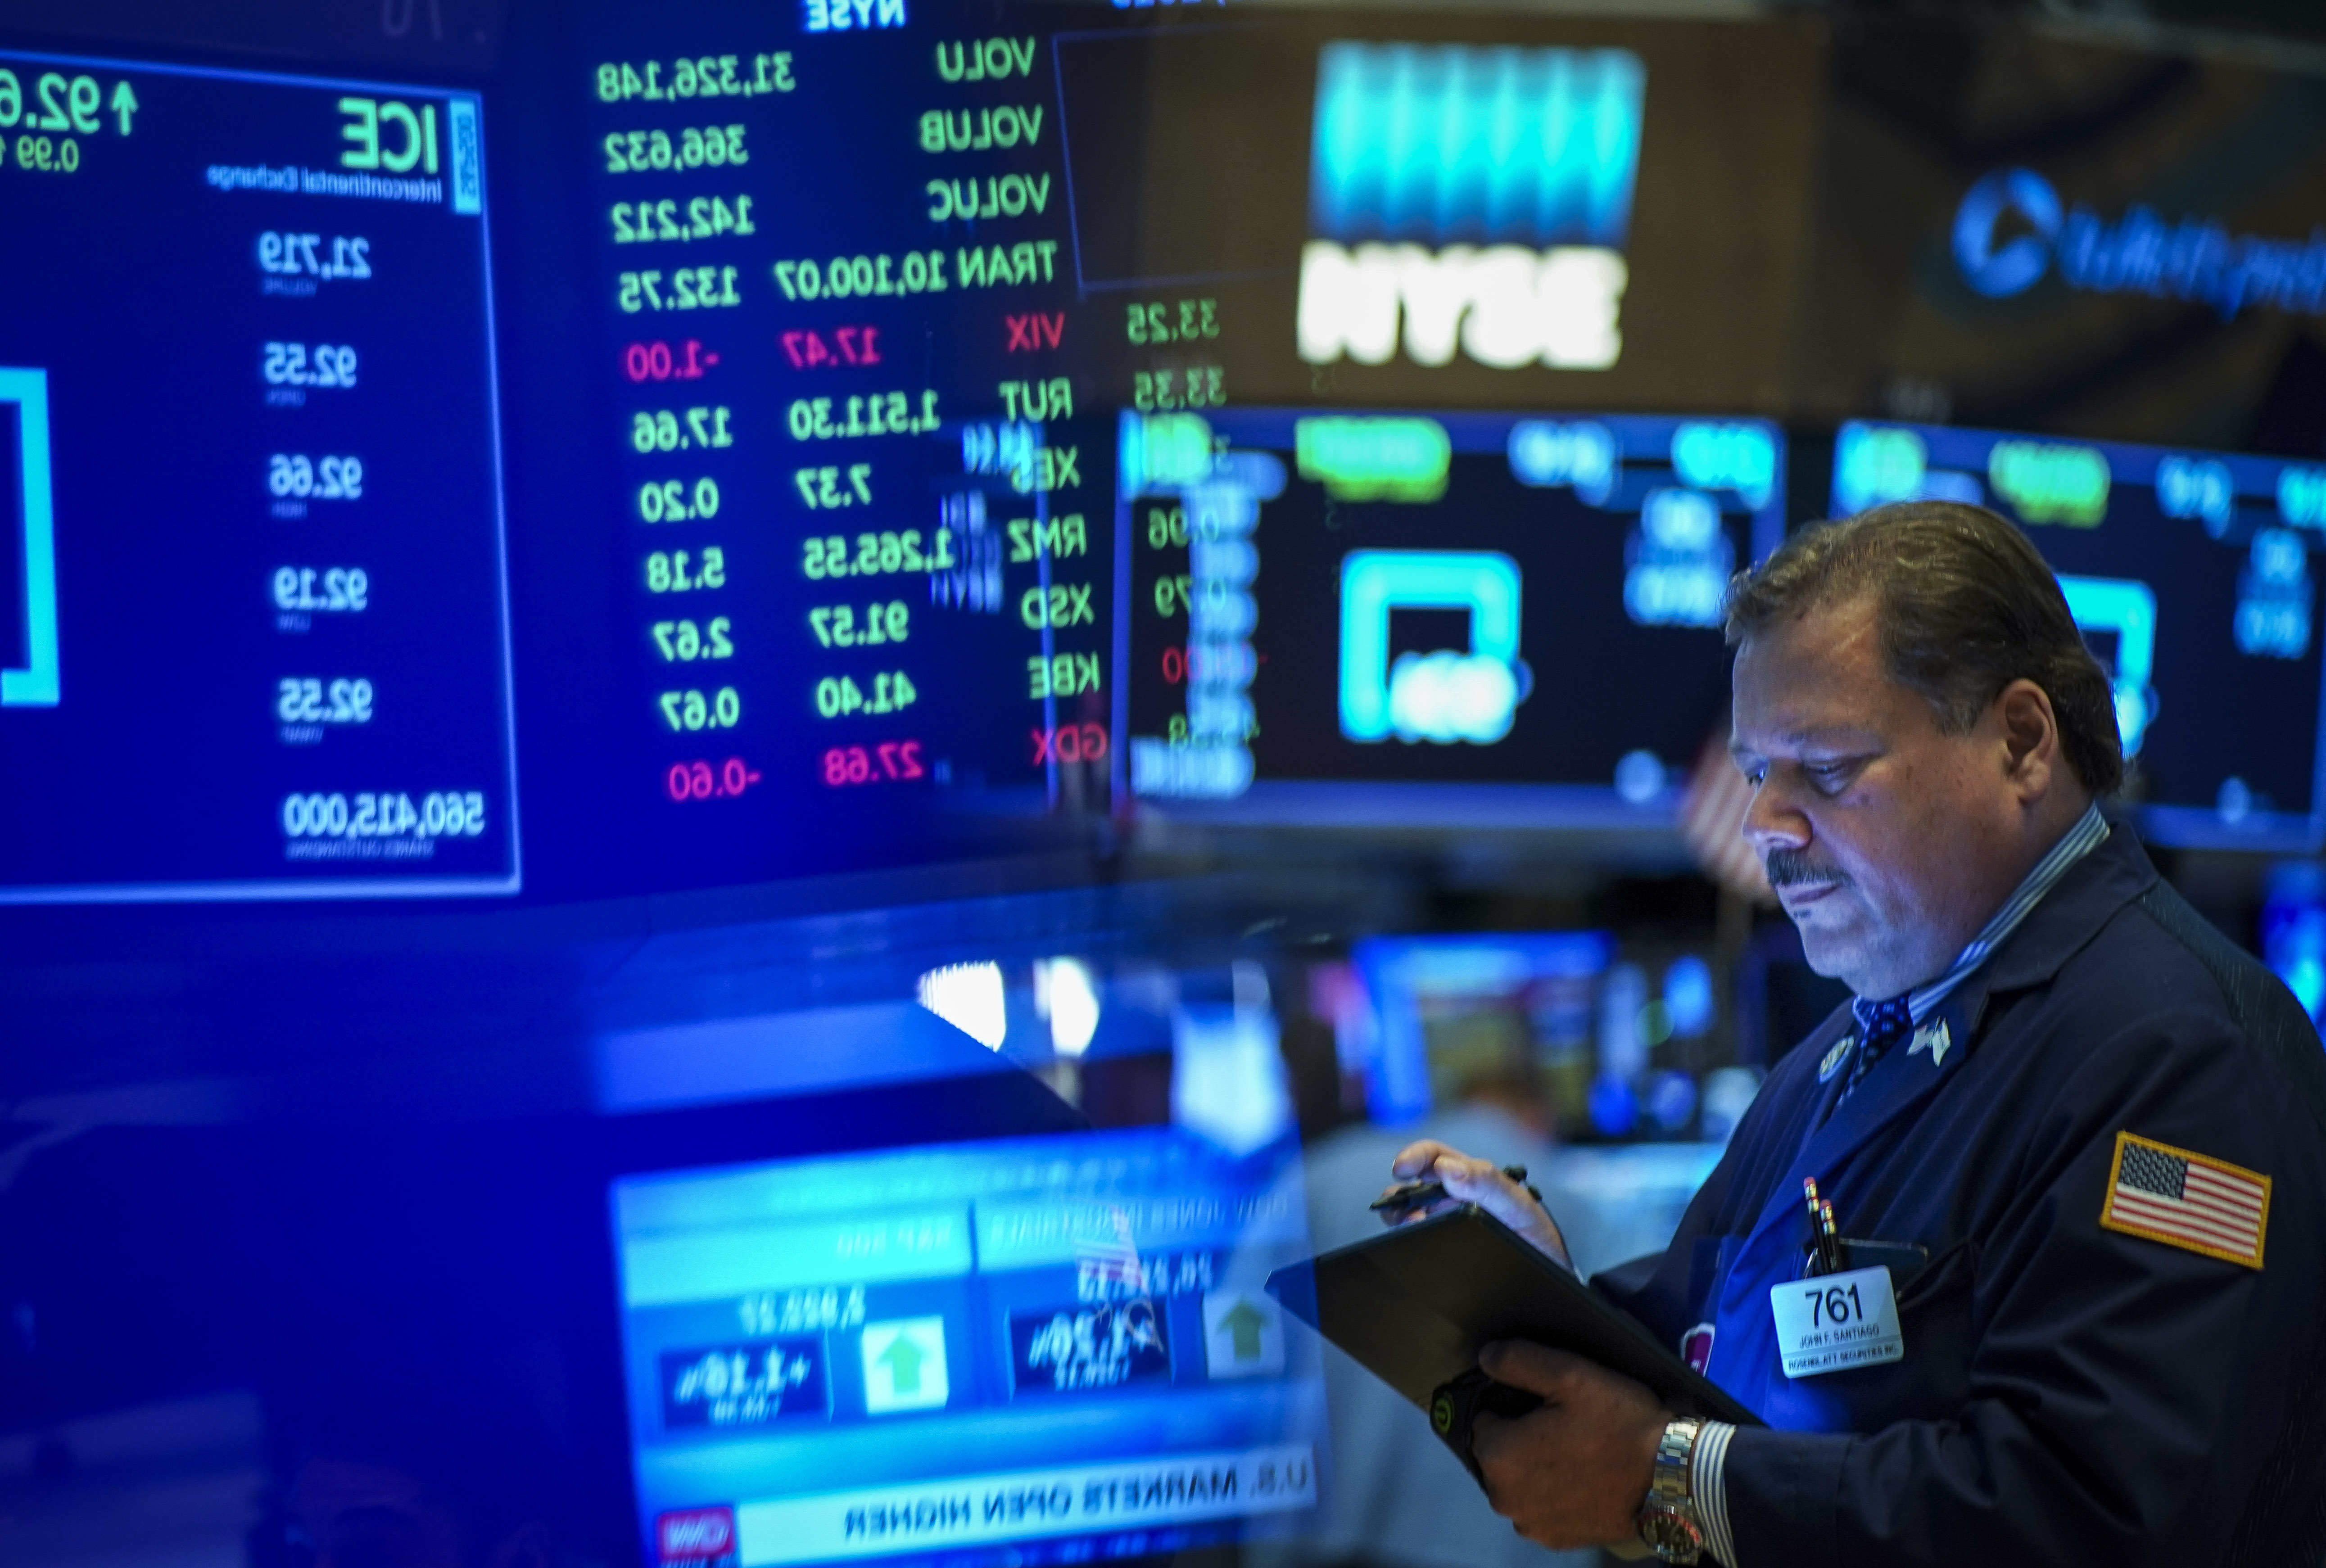 Traders and financial professionals work on the floor of the New York Stock Exchange (NYSE) at the opening bell on Aug. 19, 2019 in New York City.  